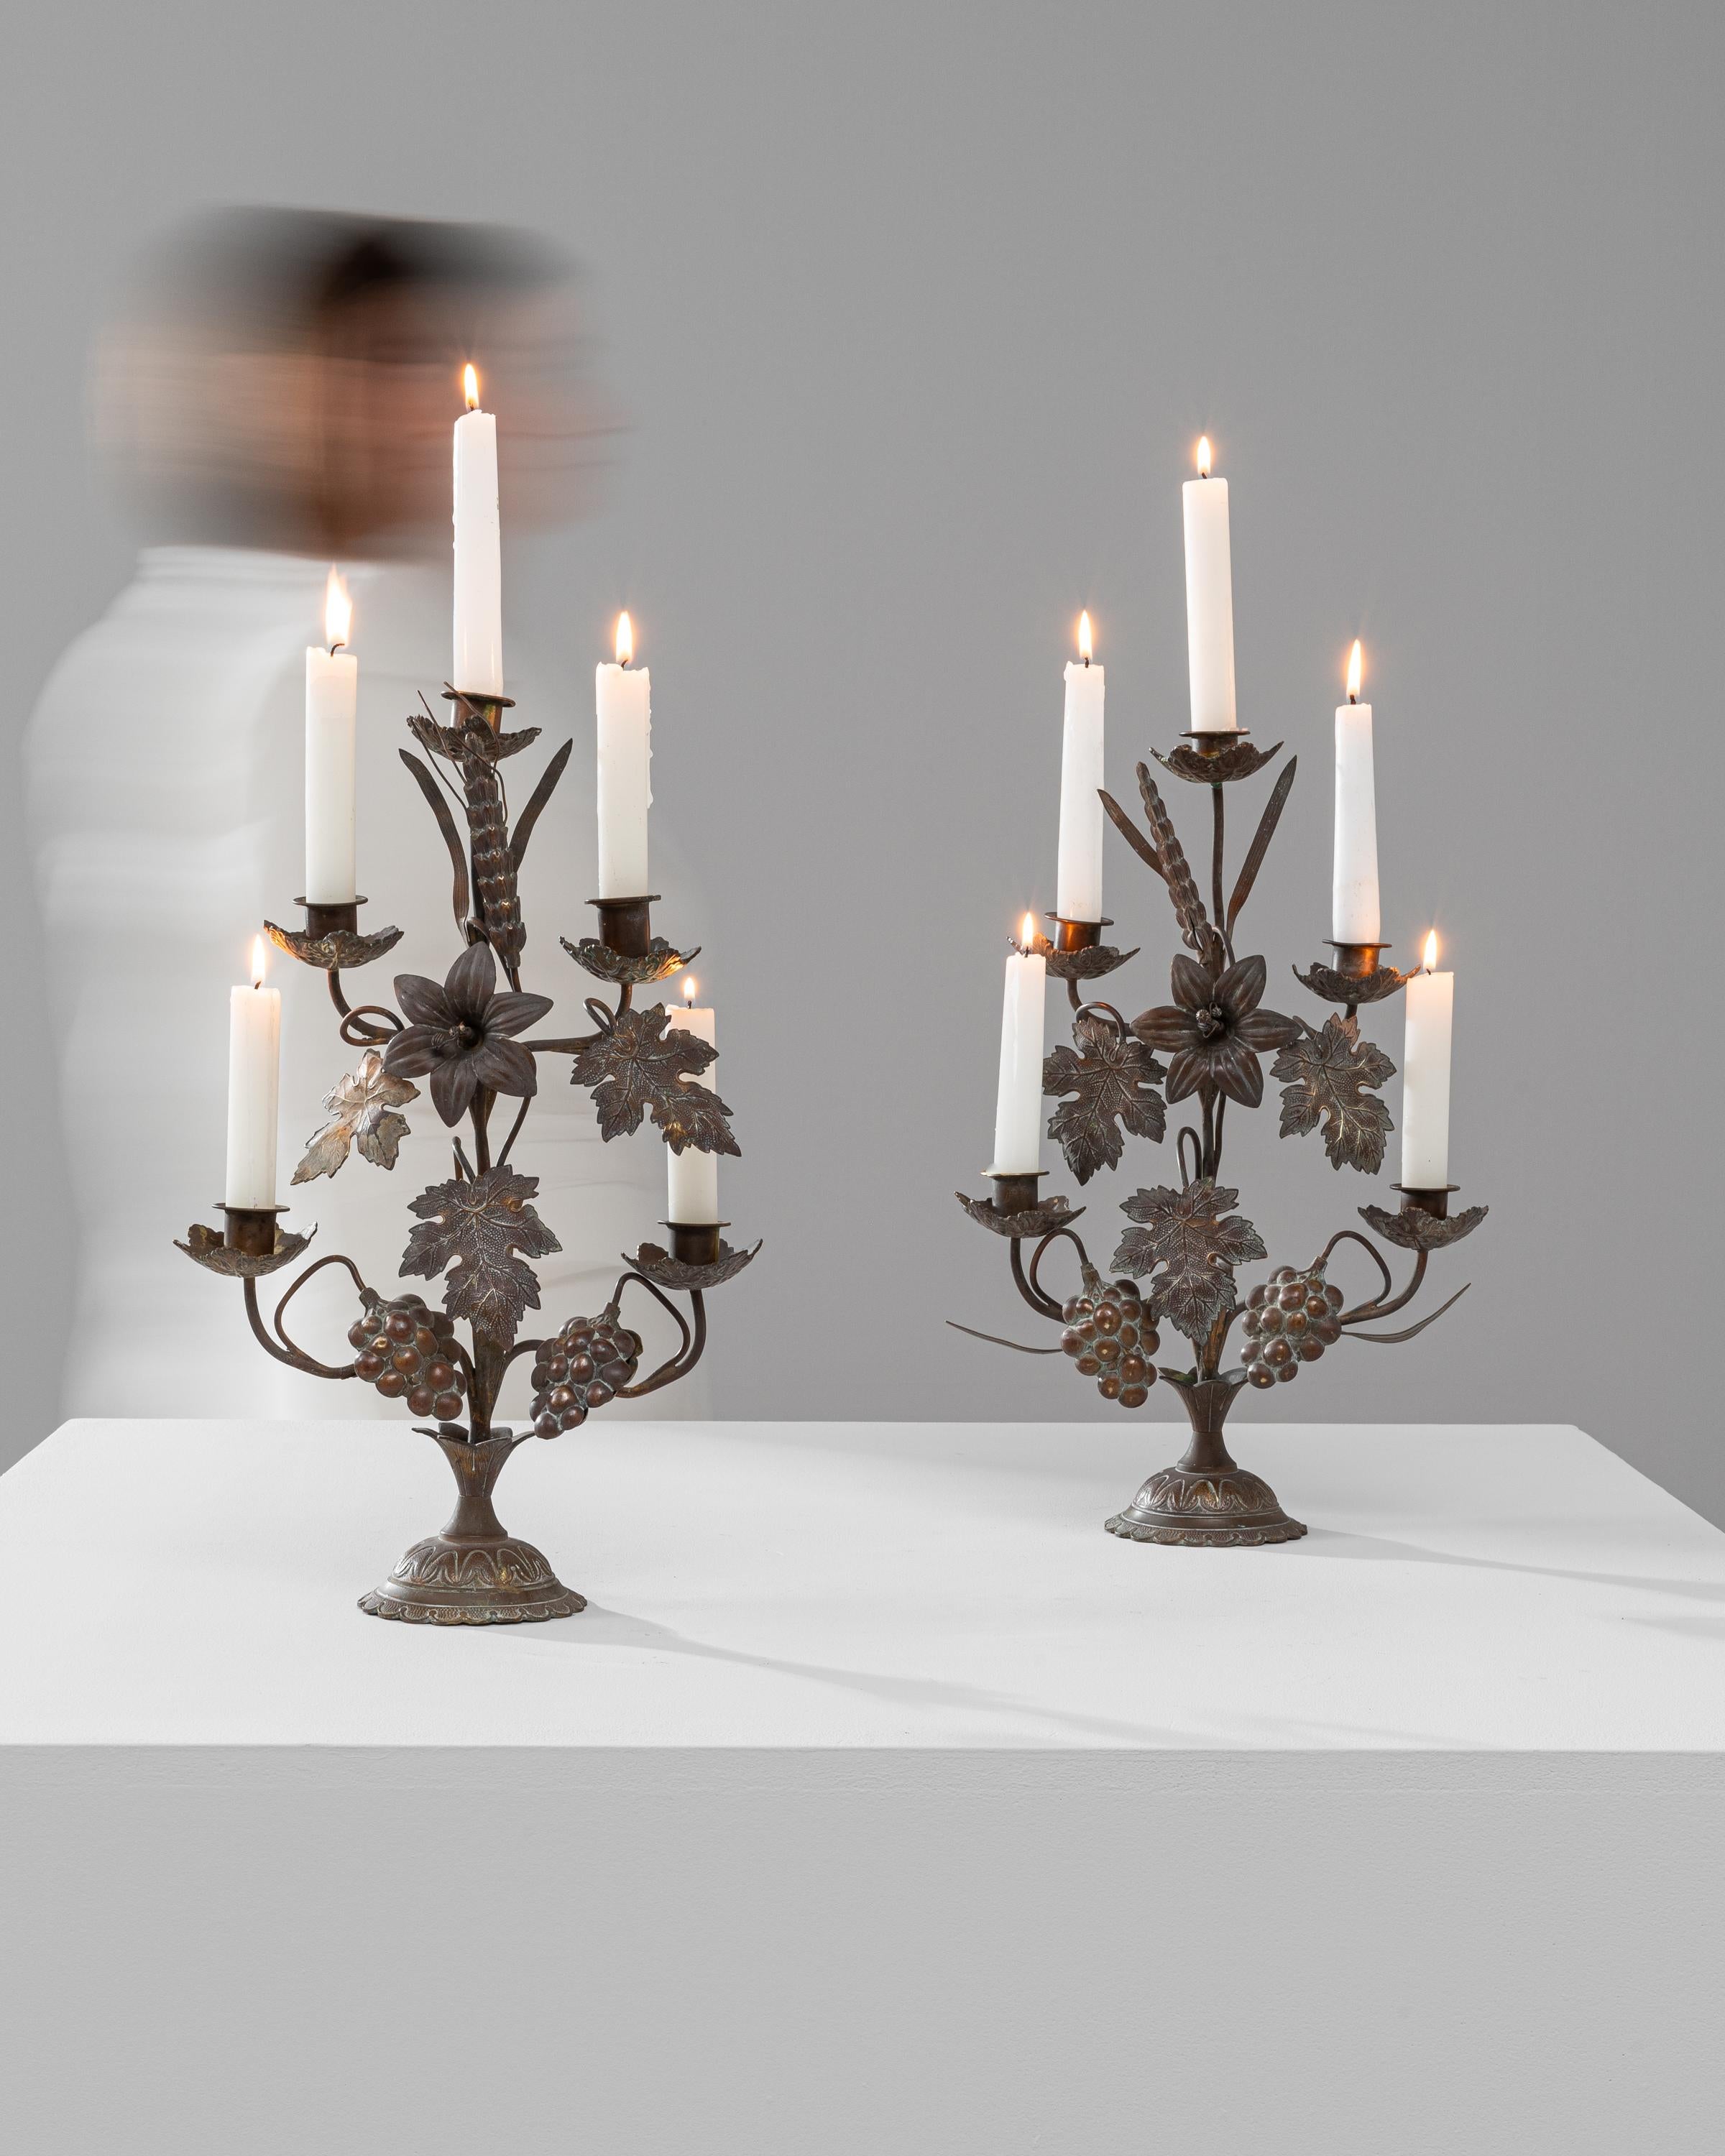 19th Century French Brass Candle Holders, a Pair For Sale 2